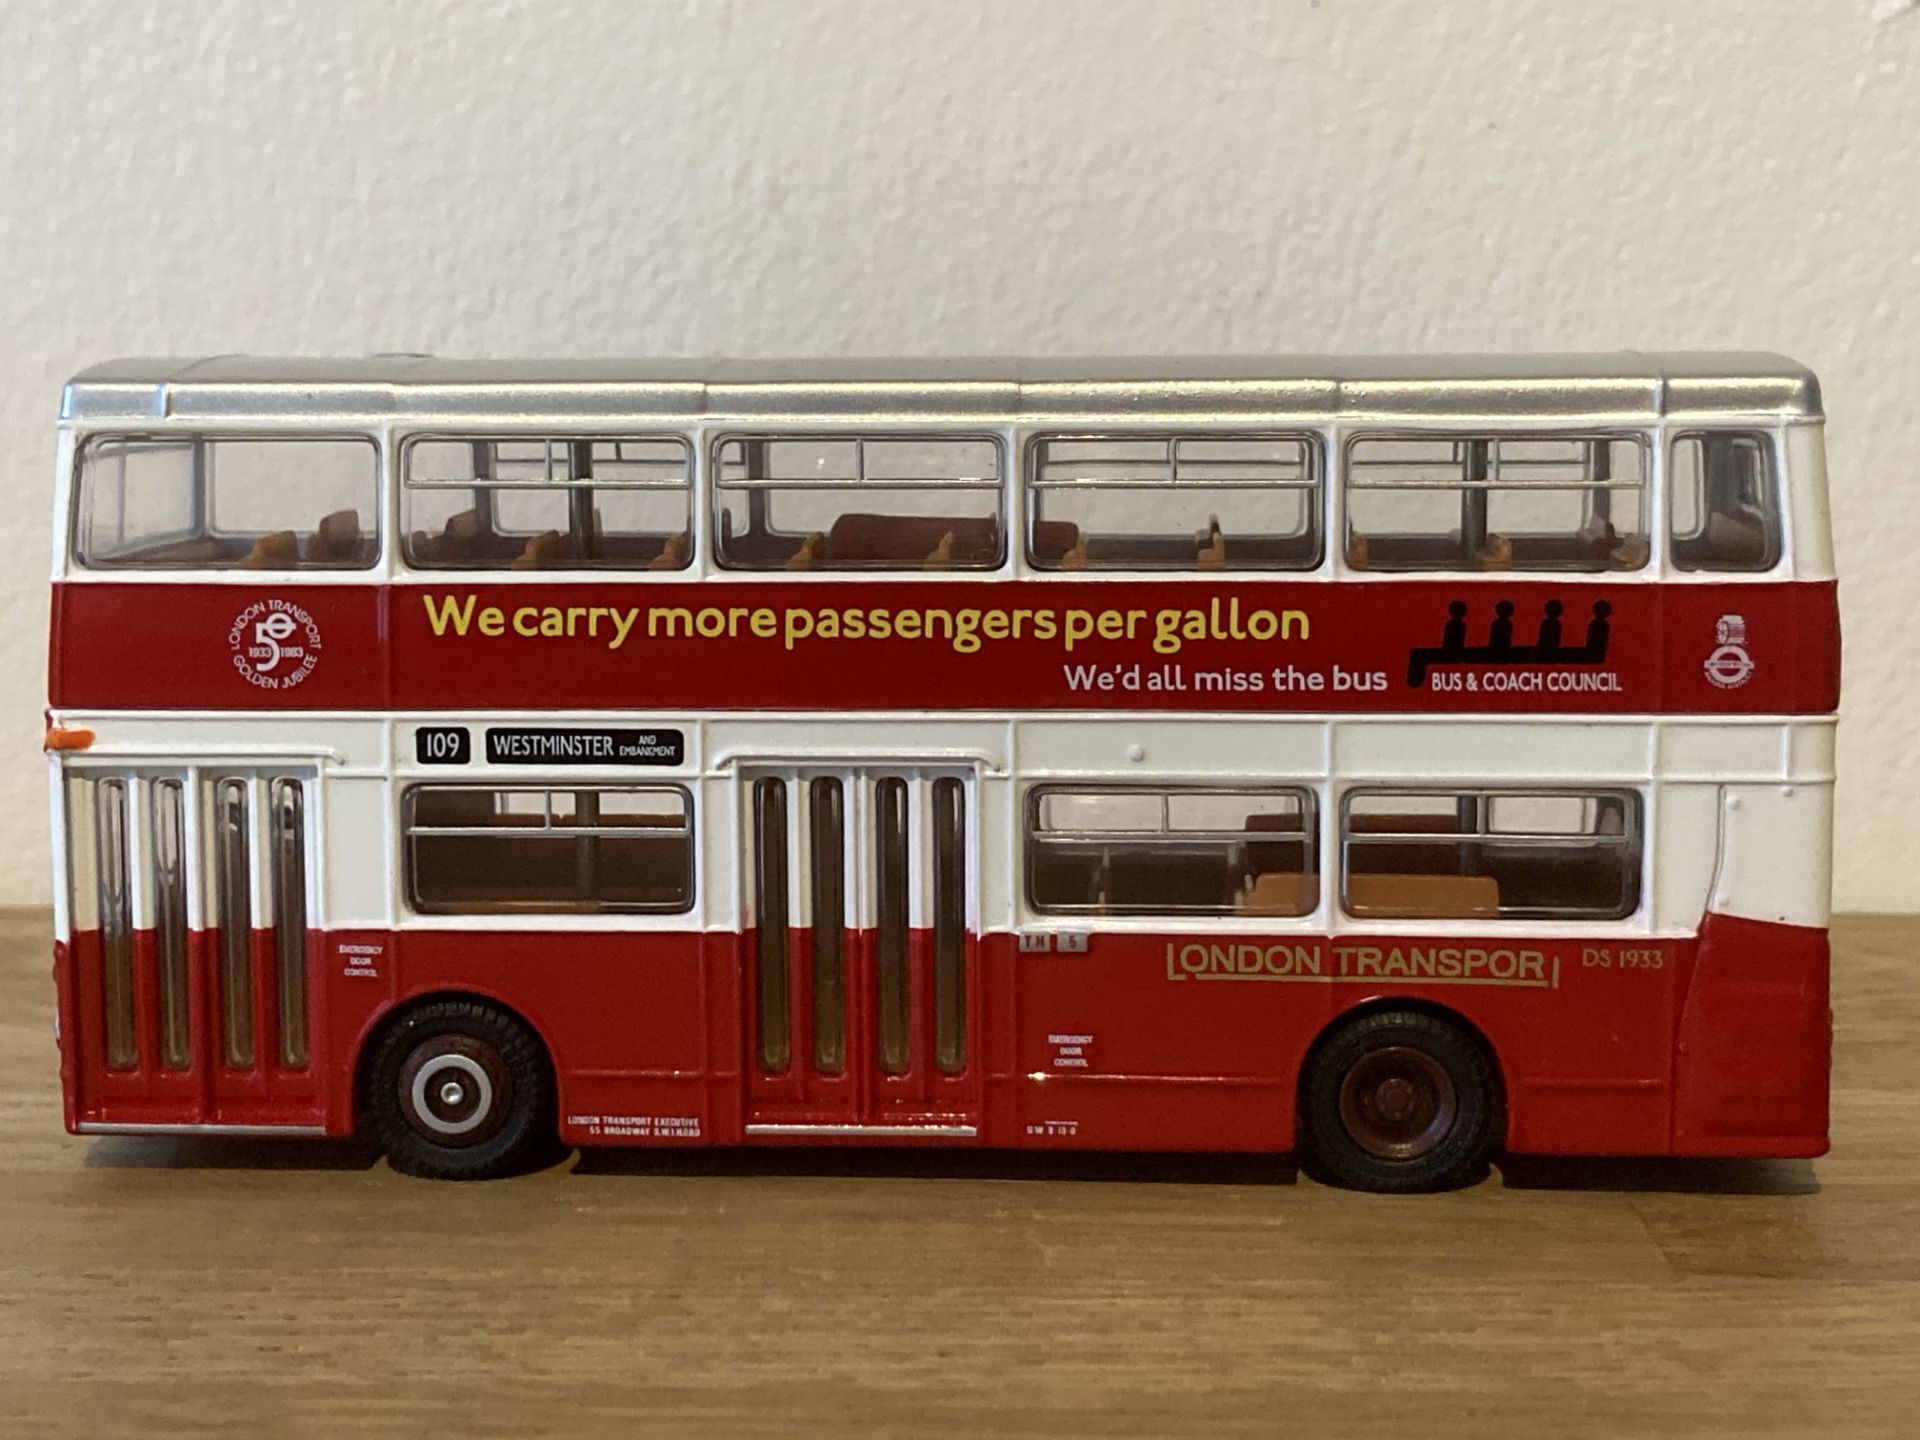 Limited Edition Beatties - London Transport - Image 13 of 13